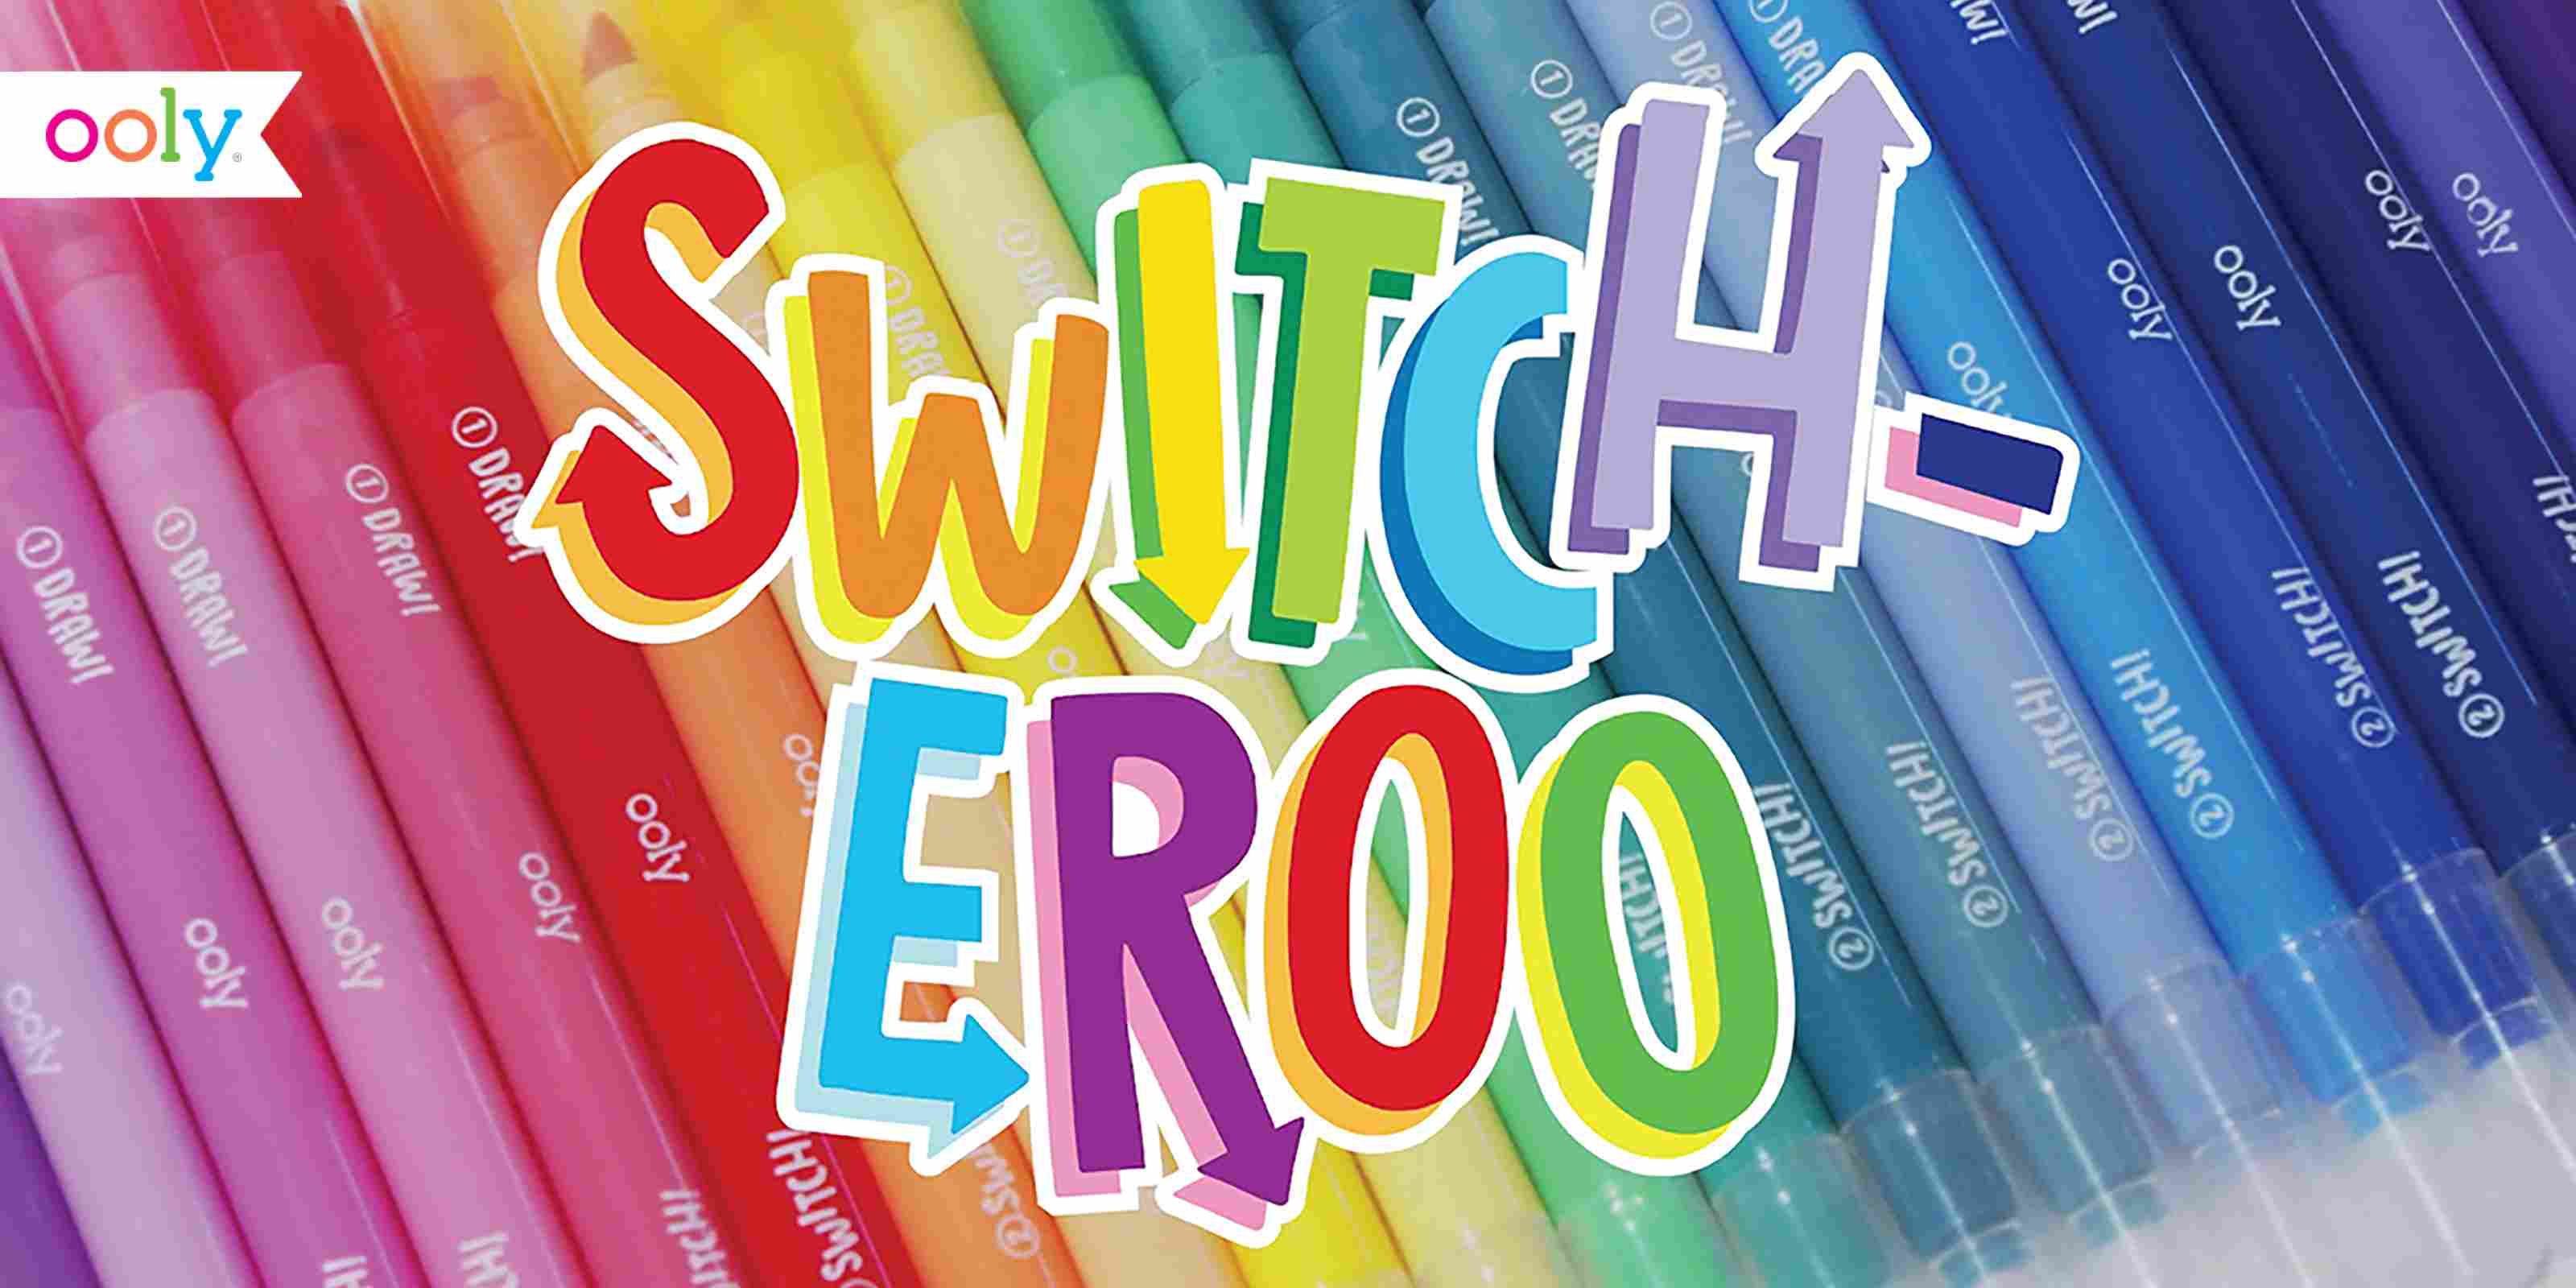 SWITCHEROO COLOR CHANGING MARKERS - The Toy Box